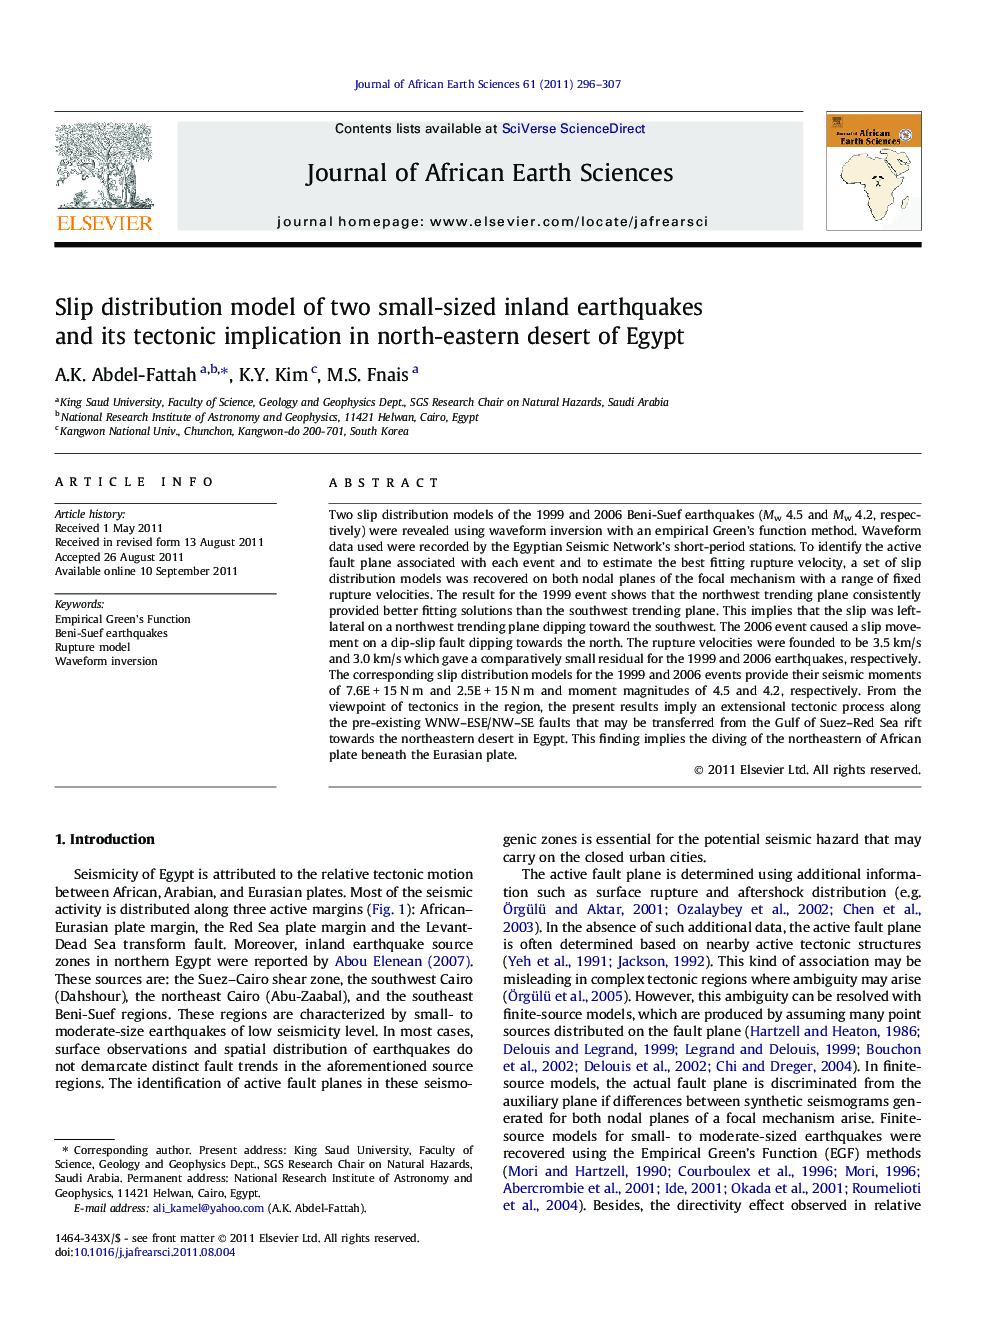 Slip distribution model of two small-sized inland earthquakes and its tectonic implication in north-eastern desert of Egypt